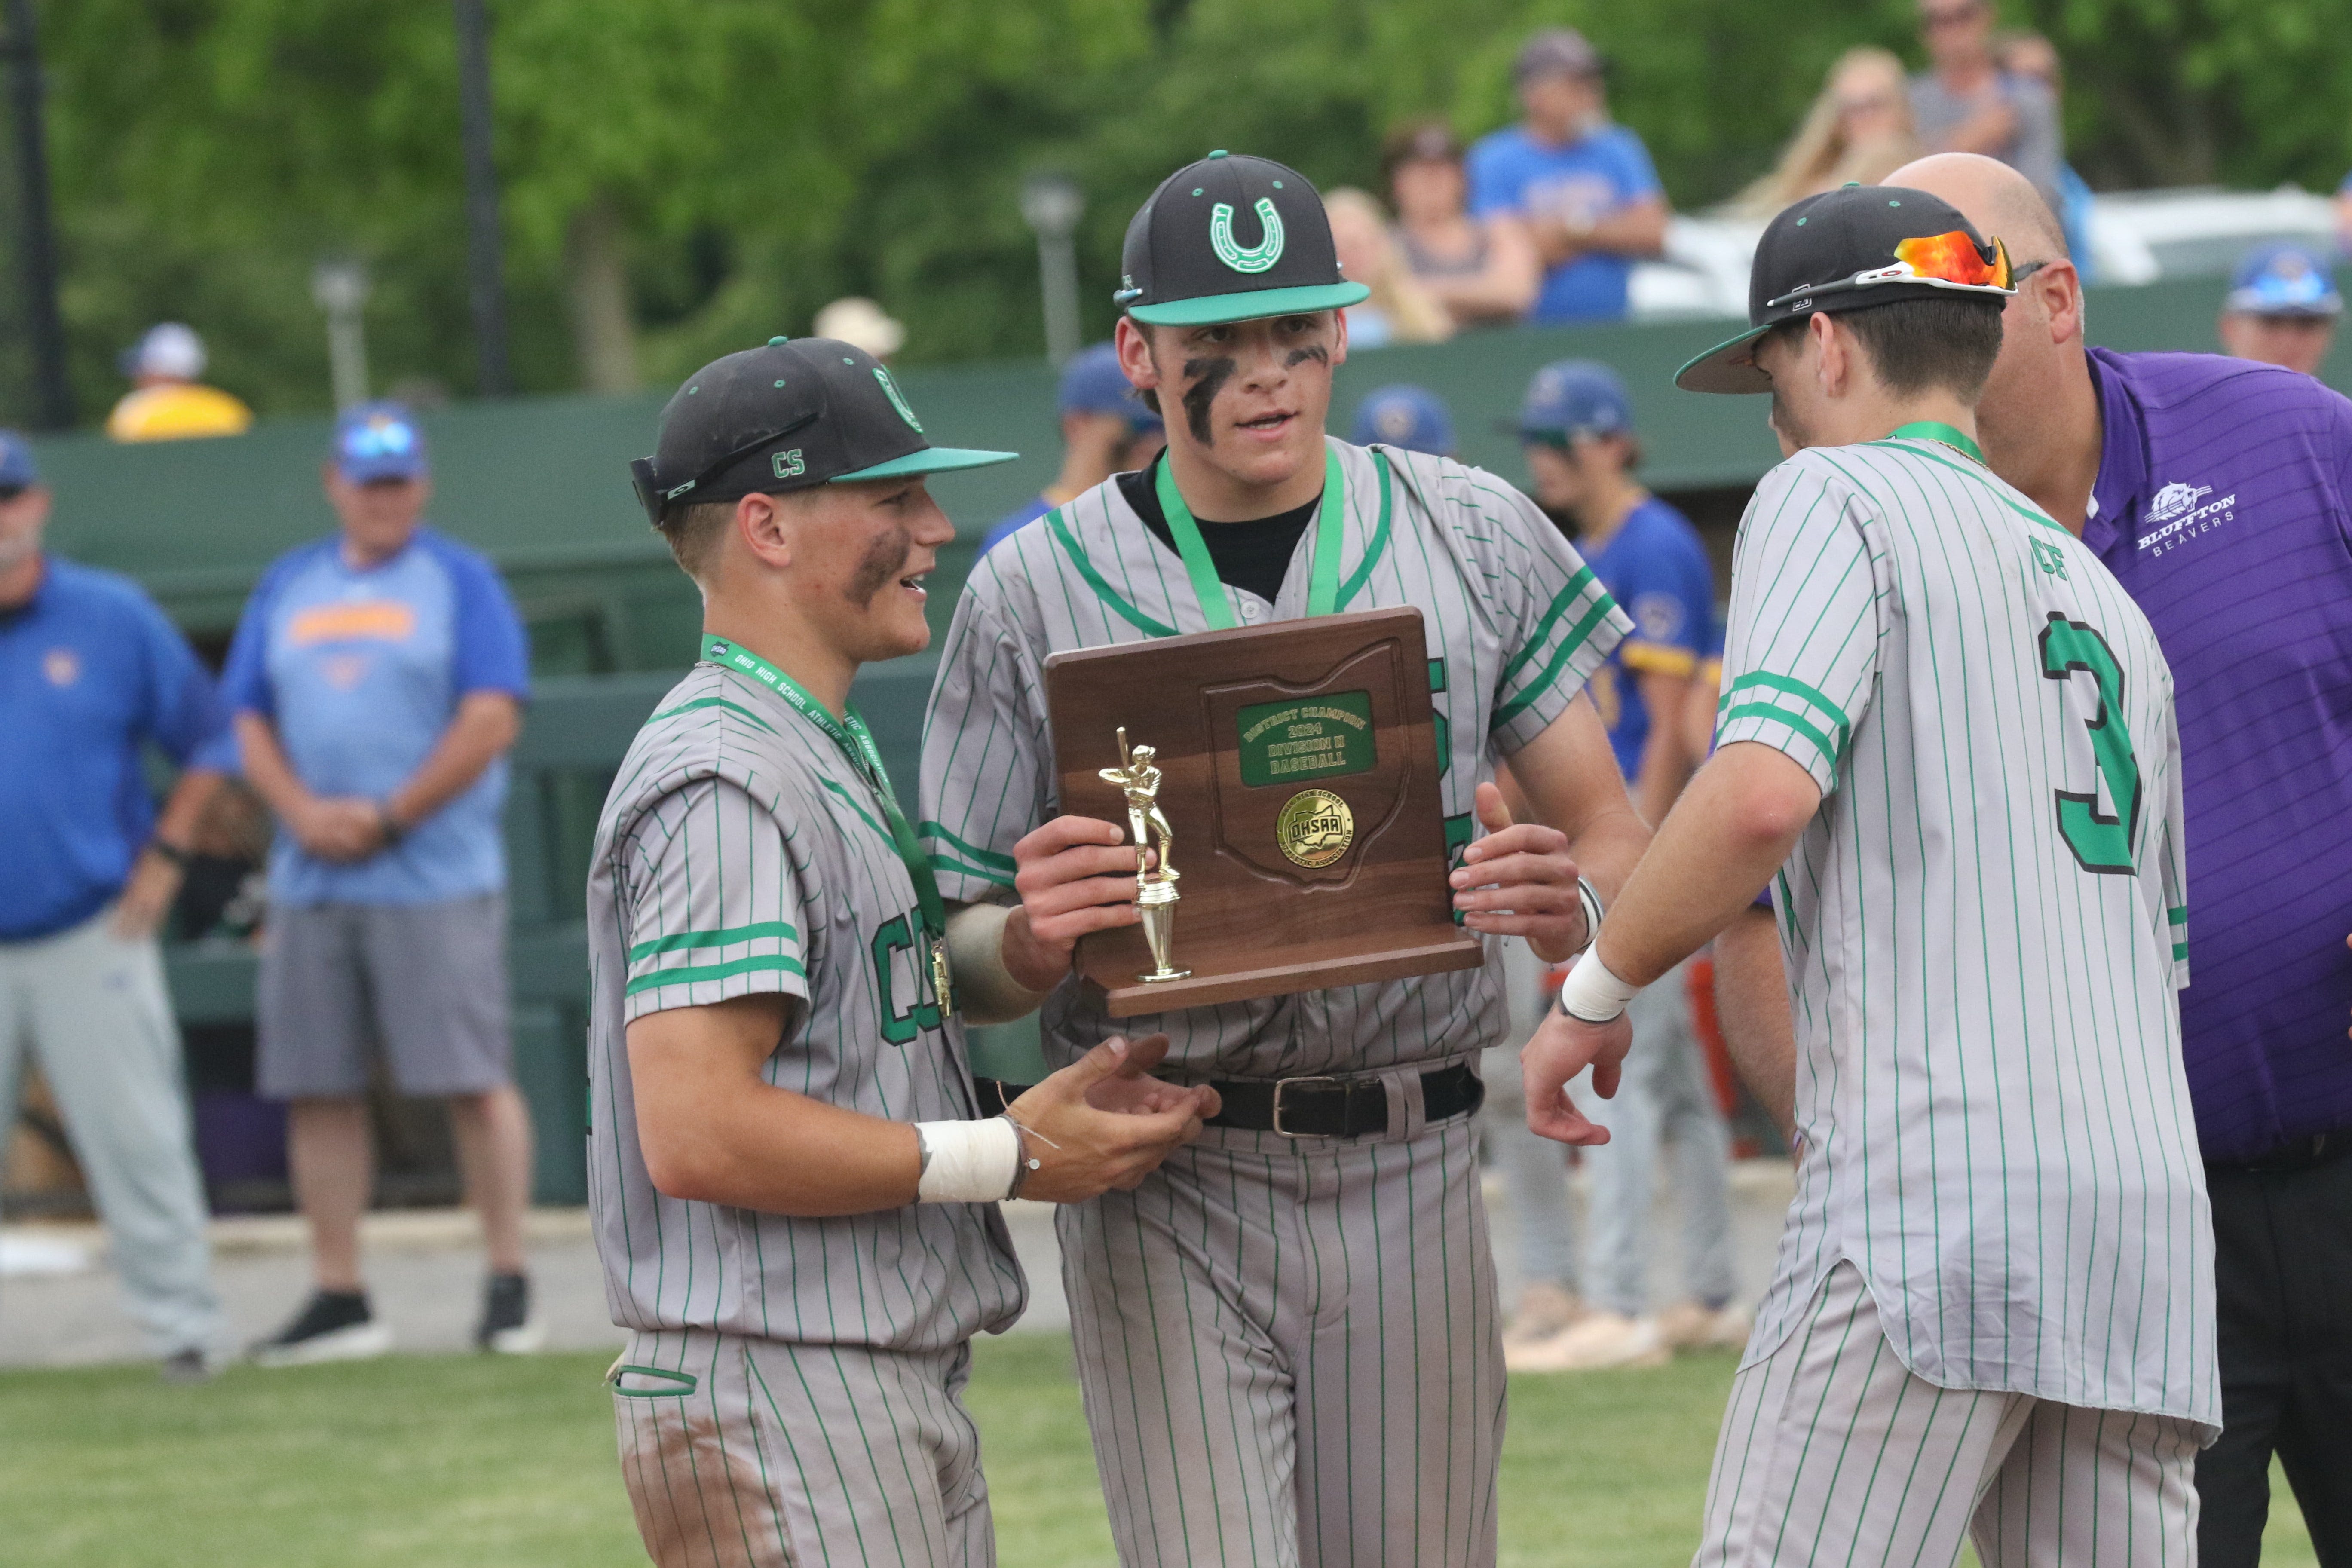 Clear Fork's Lind earns first team, five from Richland County land All-Ohio baseball honors